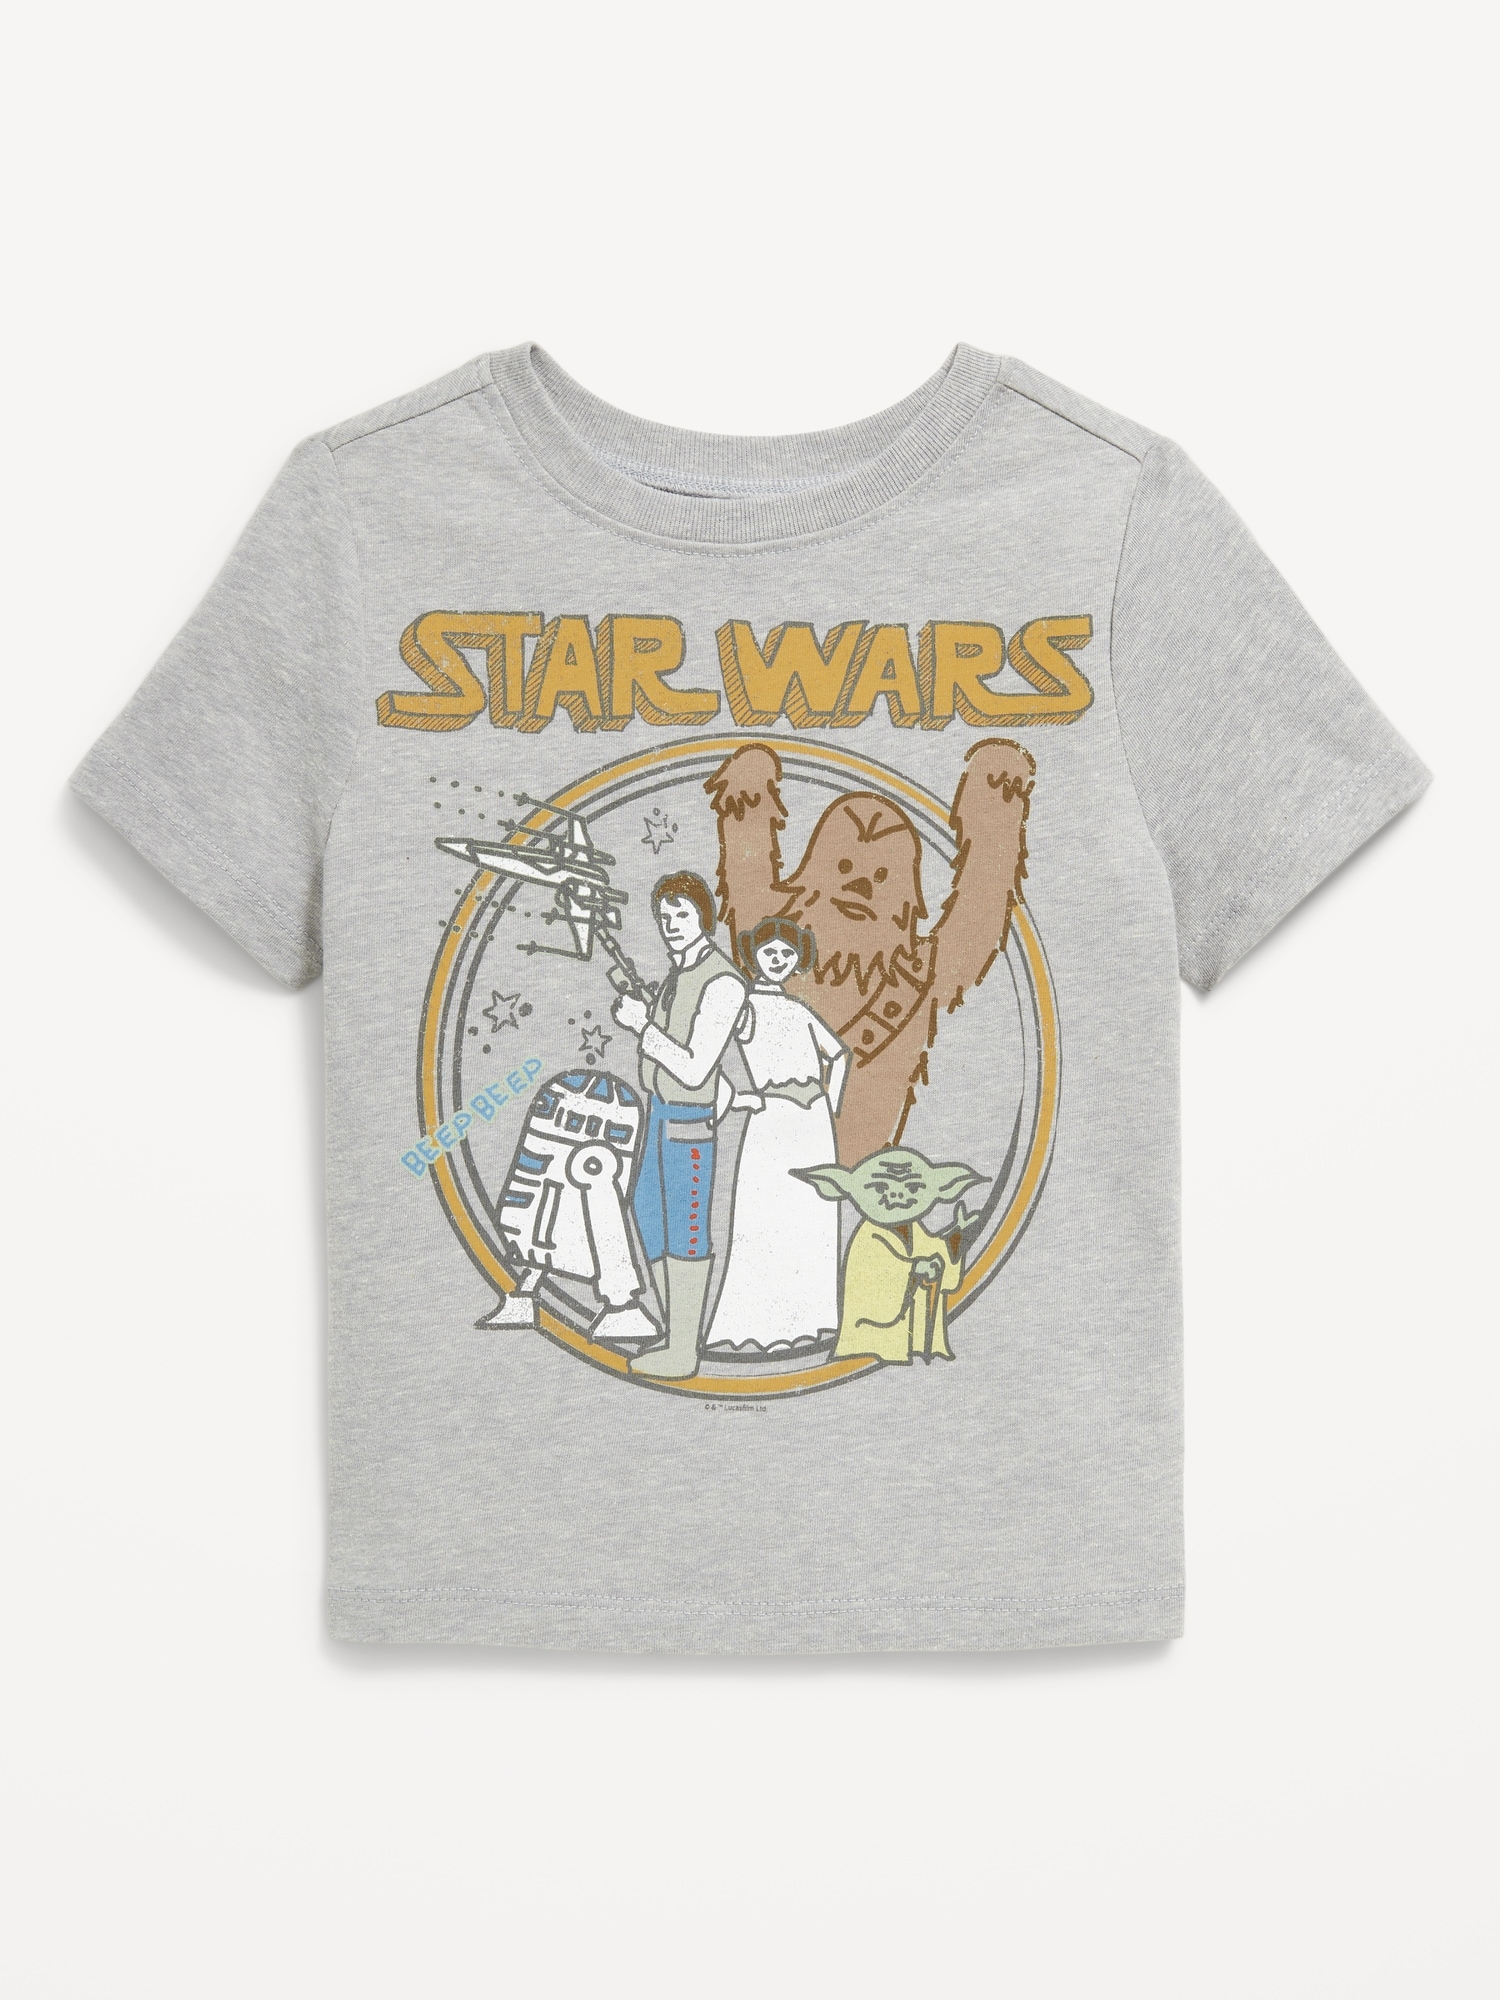 Star Wars™ Unisex Graphic T-Shirt for Toddler